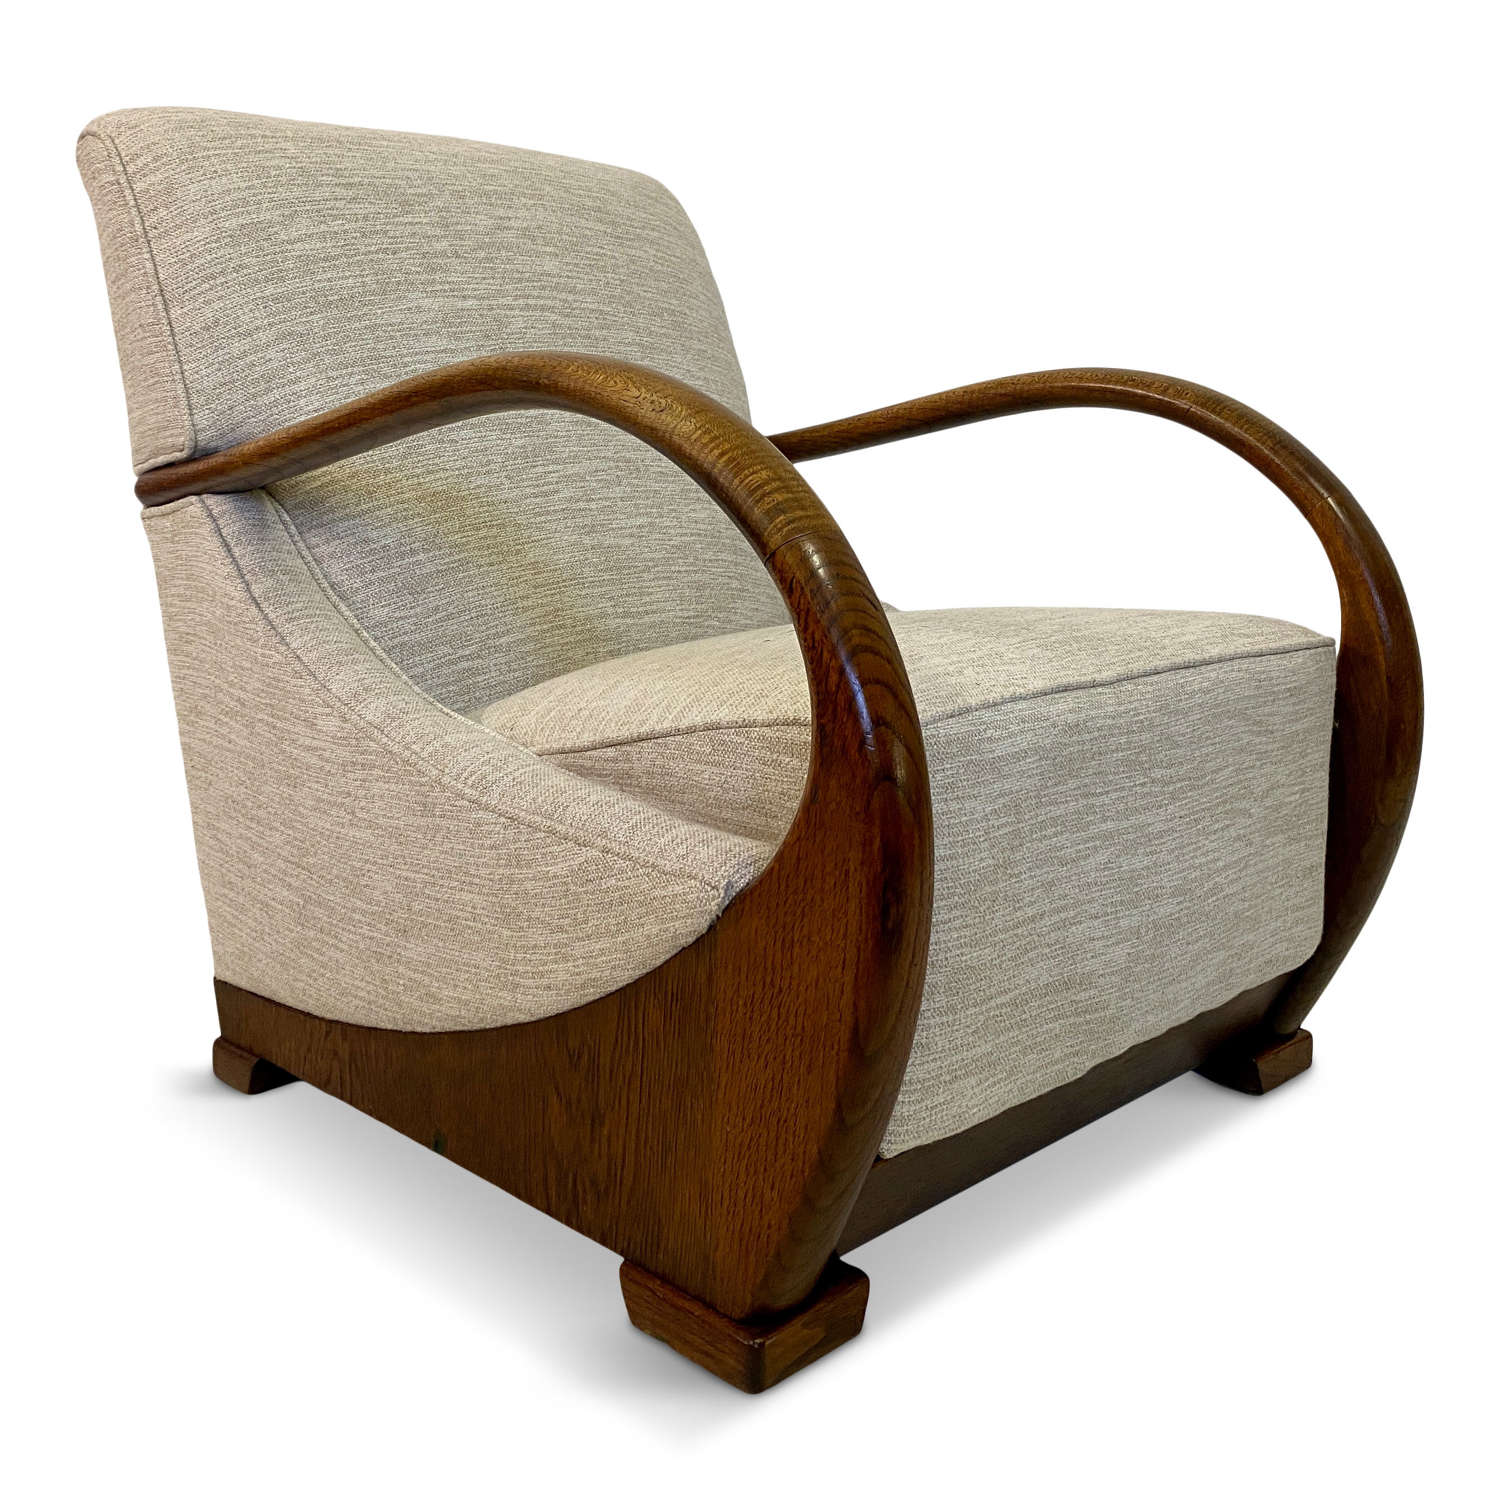 1930s French Armchair in Linen with Curved Arms